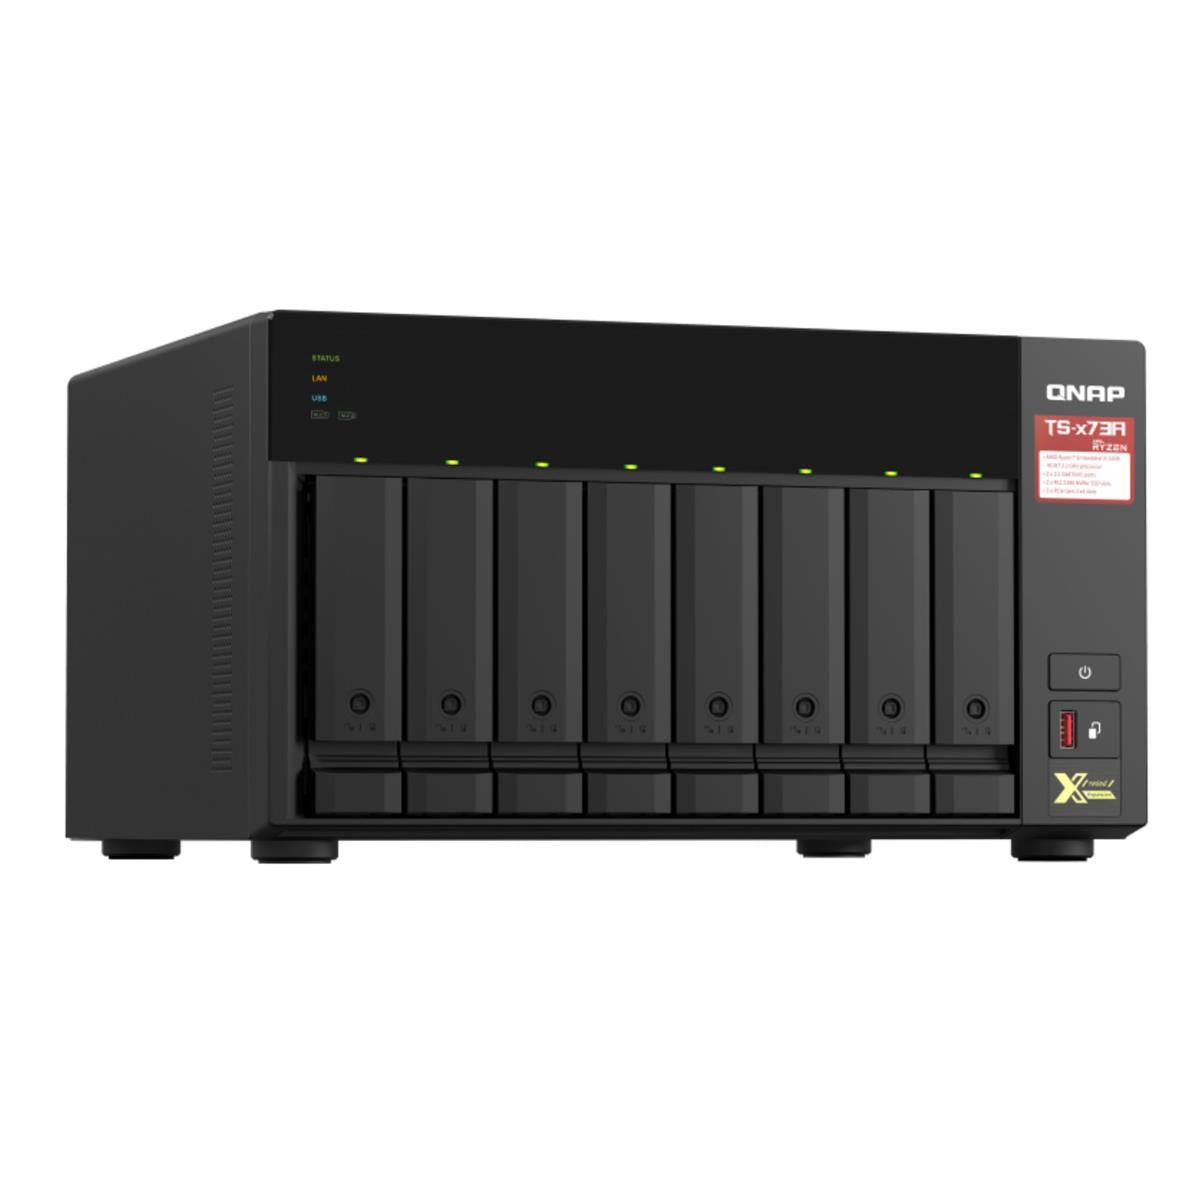 QNAP TS-873A 8-BAY NAS with 8GB DDR4 RAM and 64TB (8x8TB) Seagate Ironwolf NAS Drives Fully Assembled and Tested